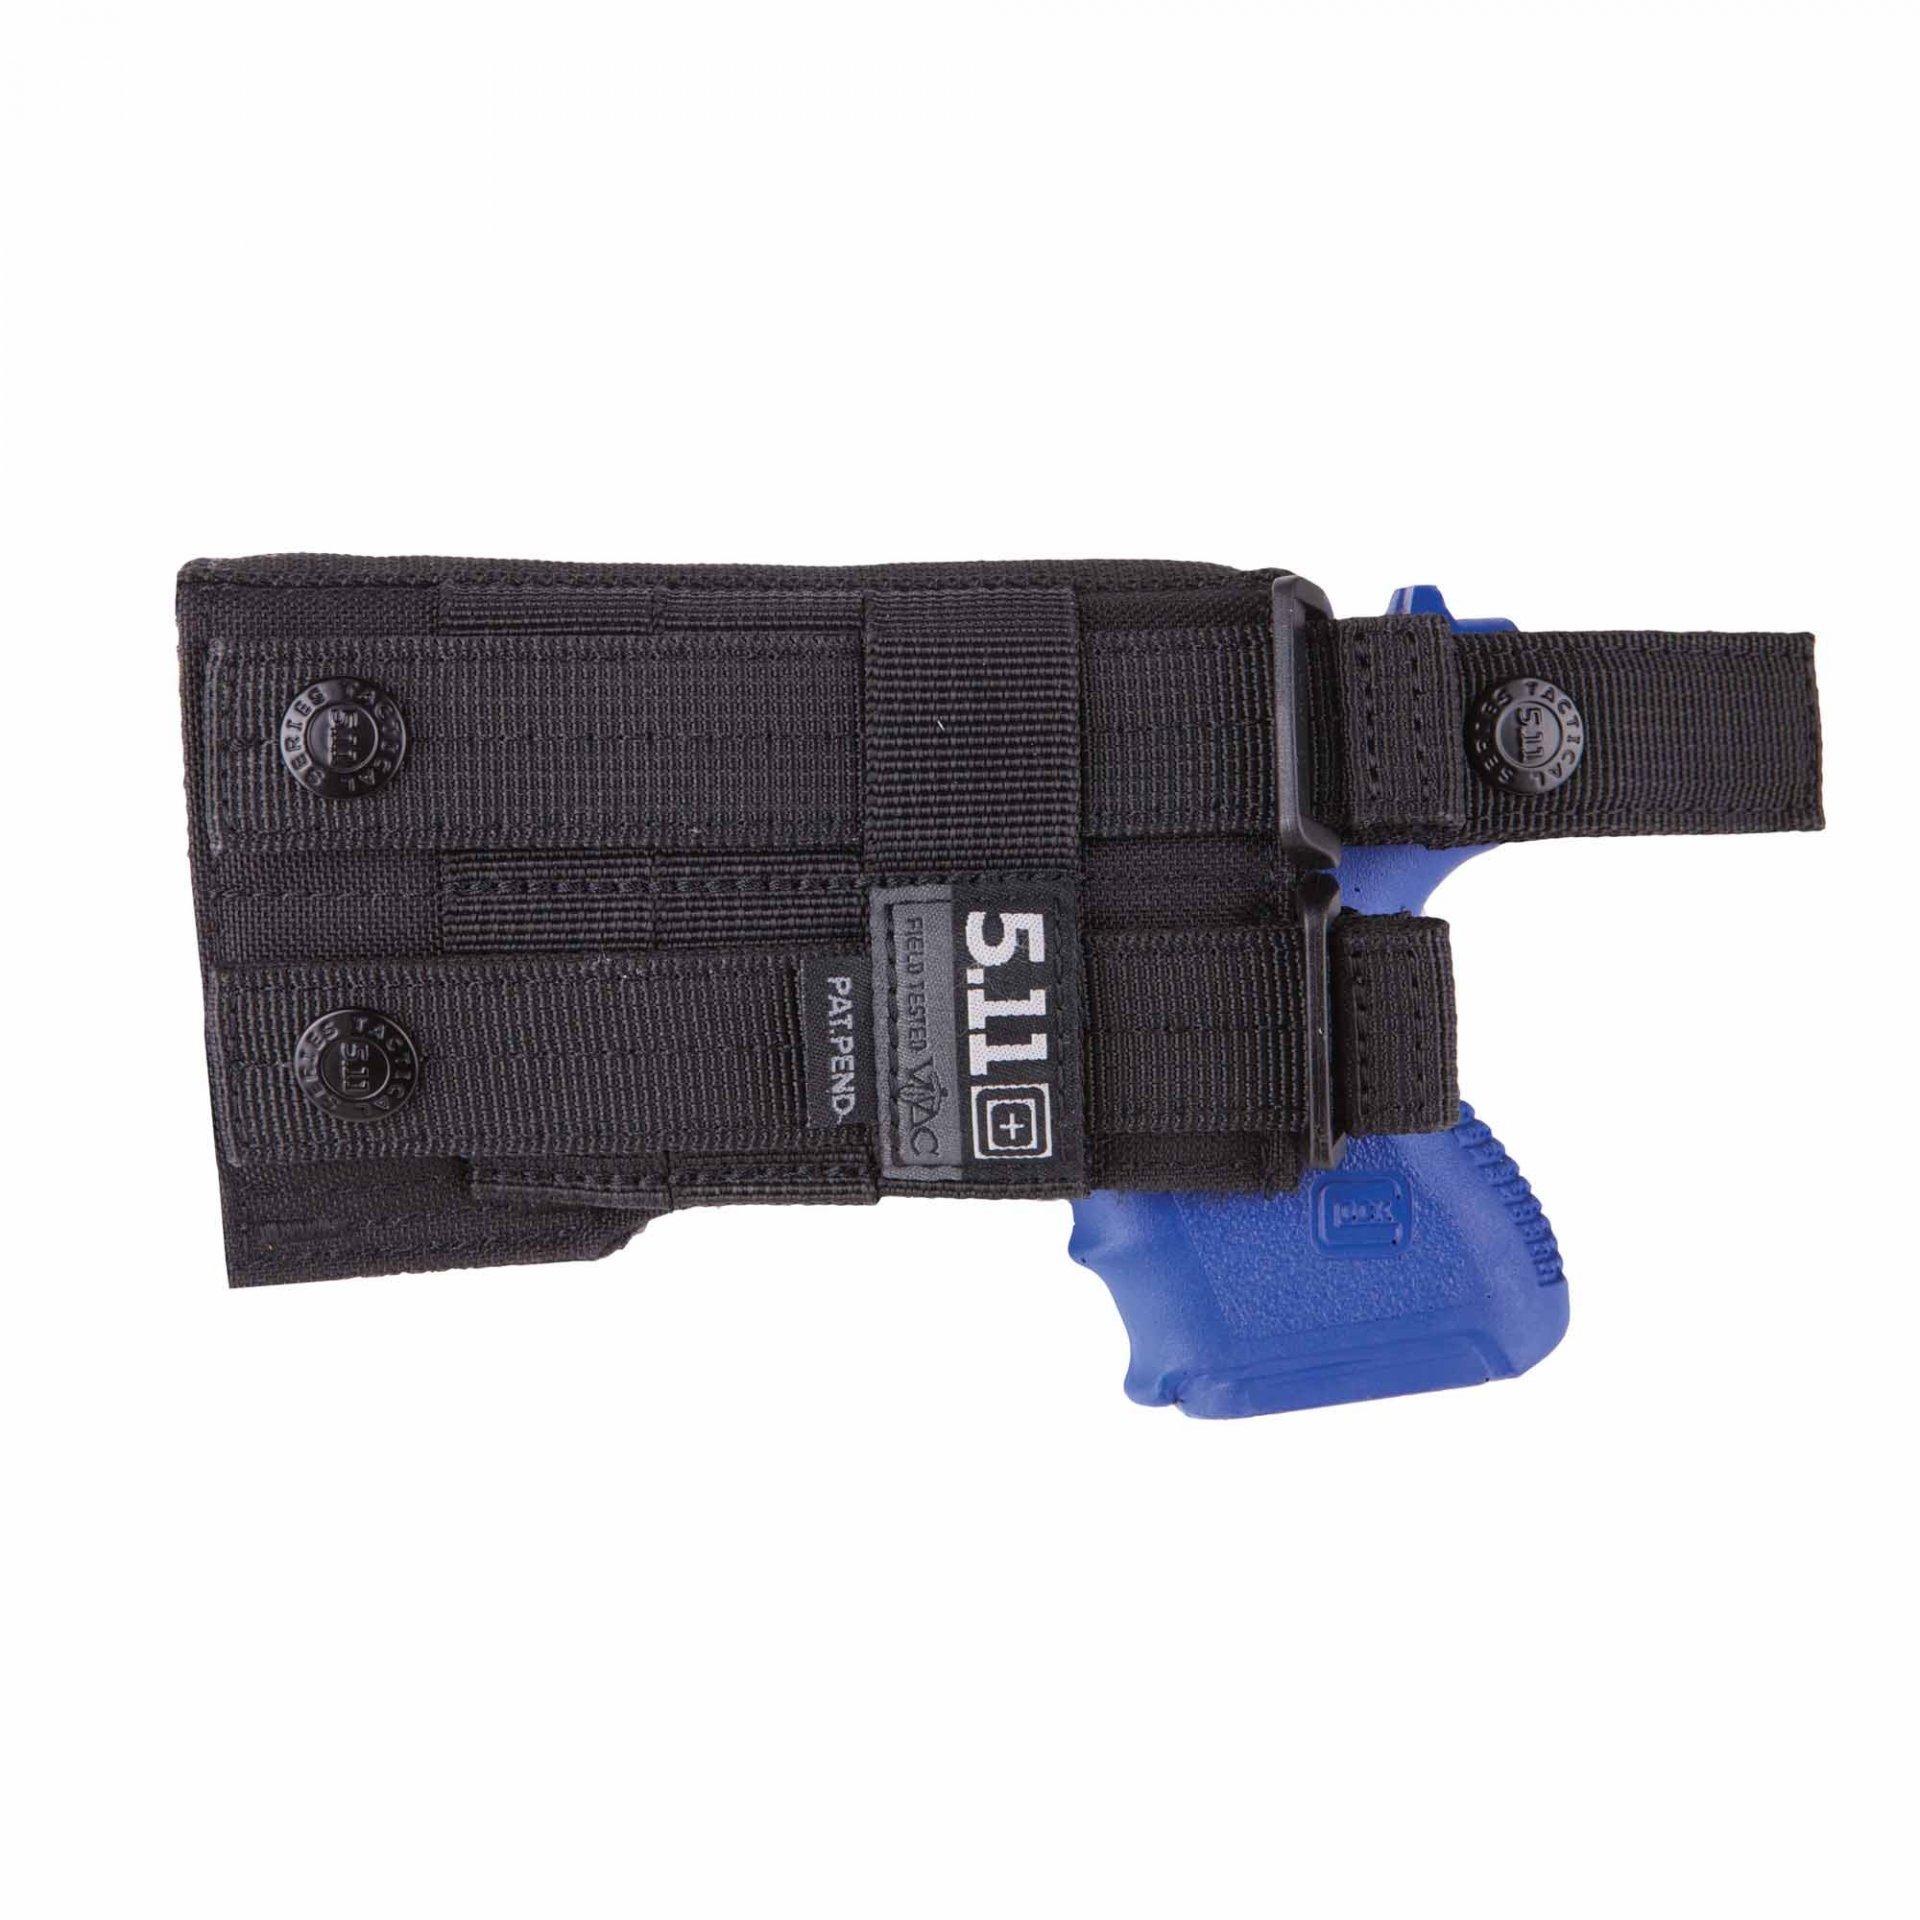 5.11 Tactical Compact LBE Holster 58828